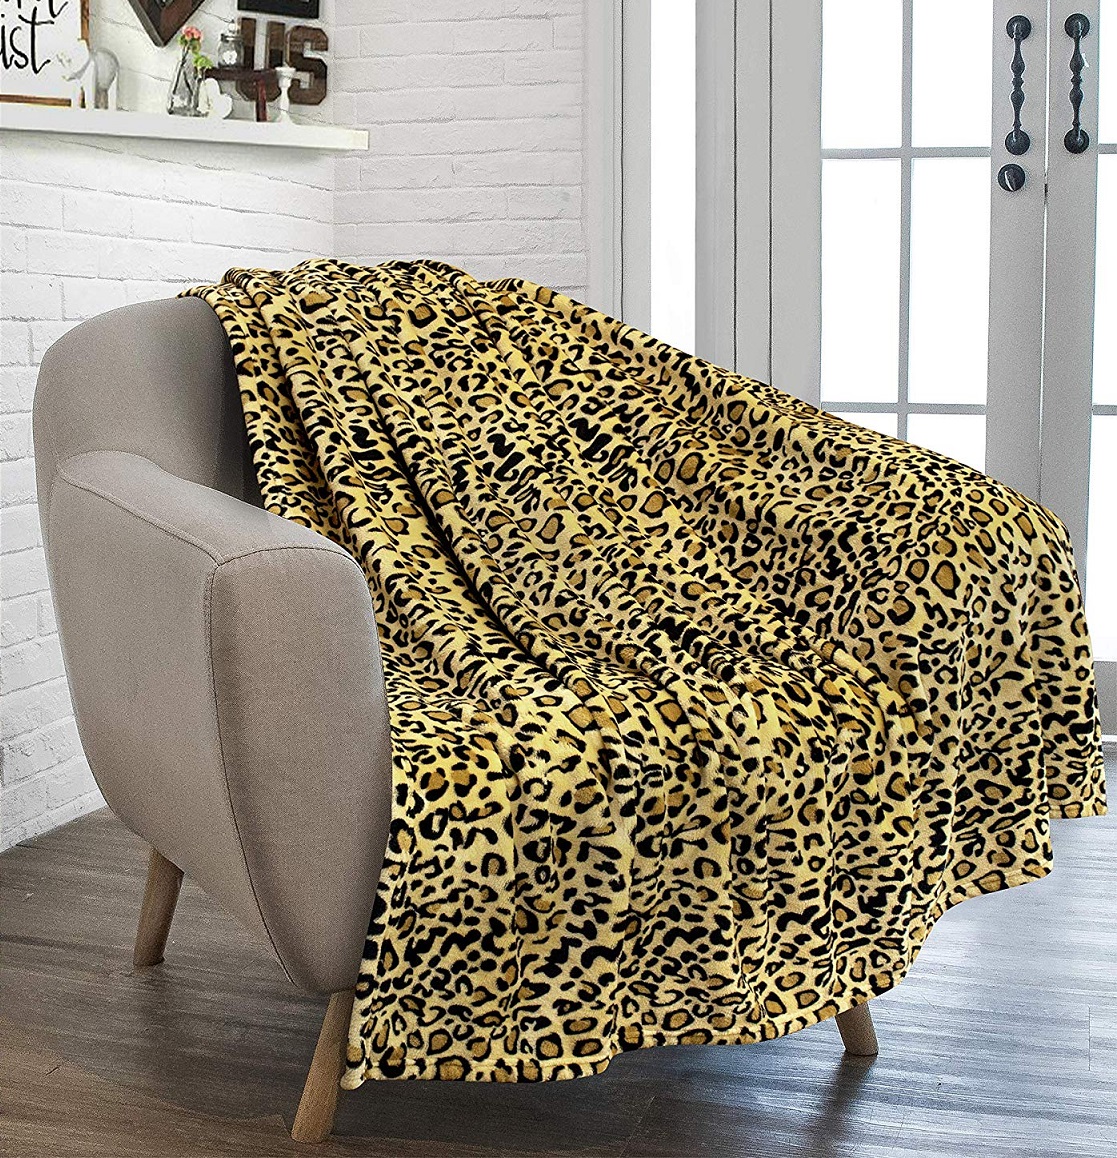 Leopard Print Animal Throw Blanket for Couch Lightweight Soft Fall Flannel Blanket for Bed Sofa Farmhouse 60x50 yikava Fleece Blanket 